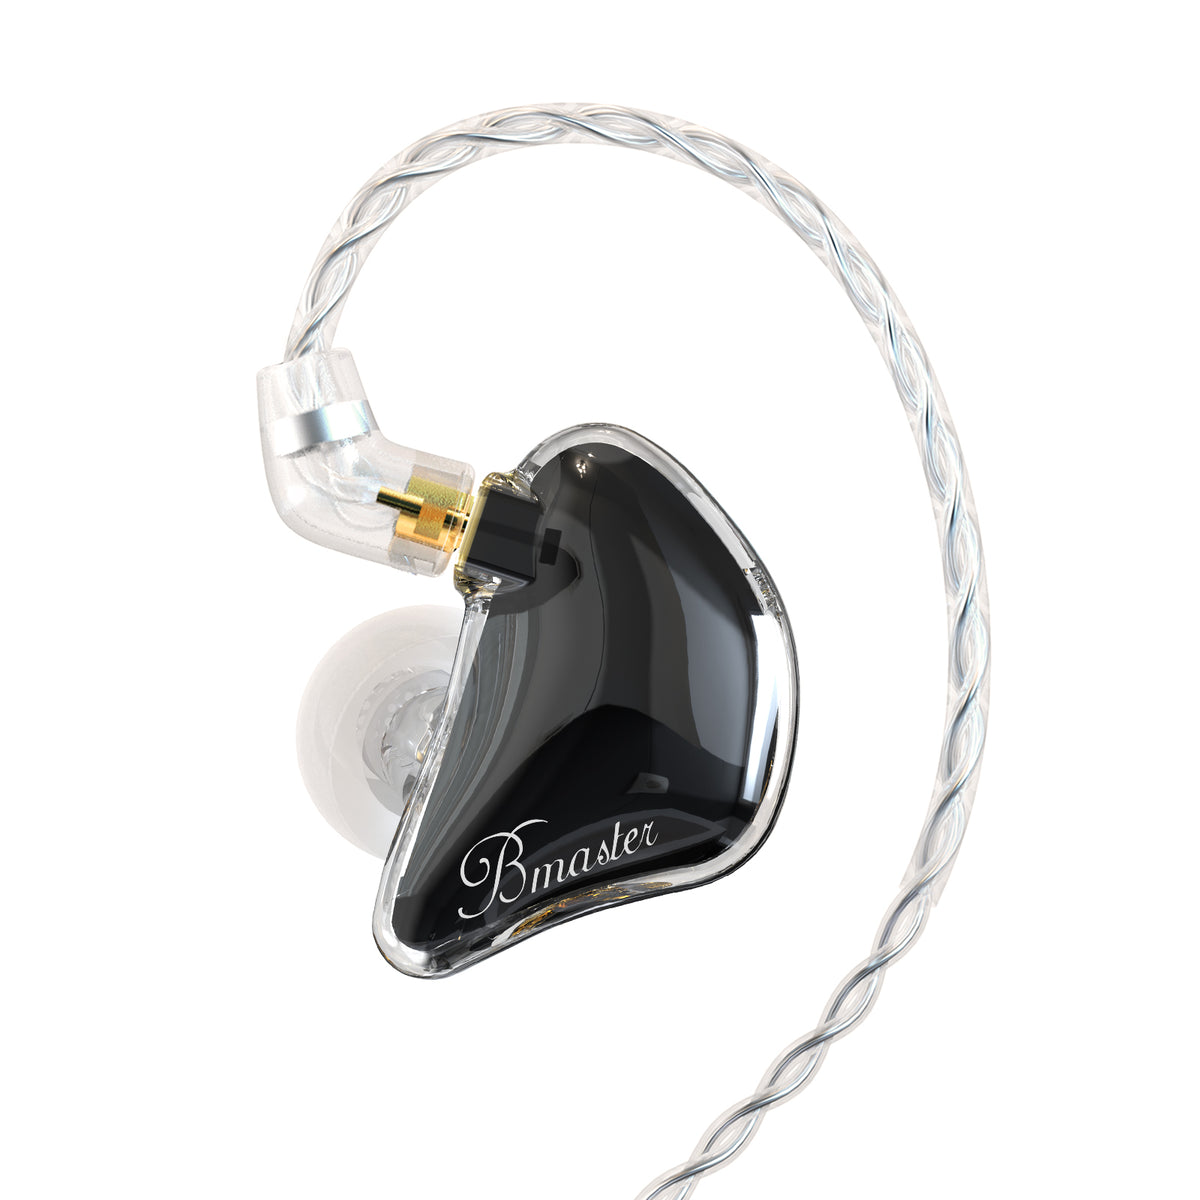 BASN Bmaster Triple Drivers In Ear Monitor Headphones (Clear